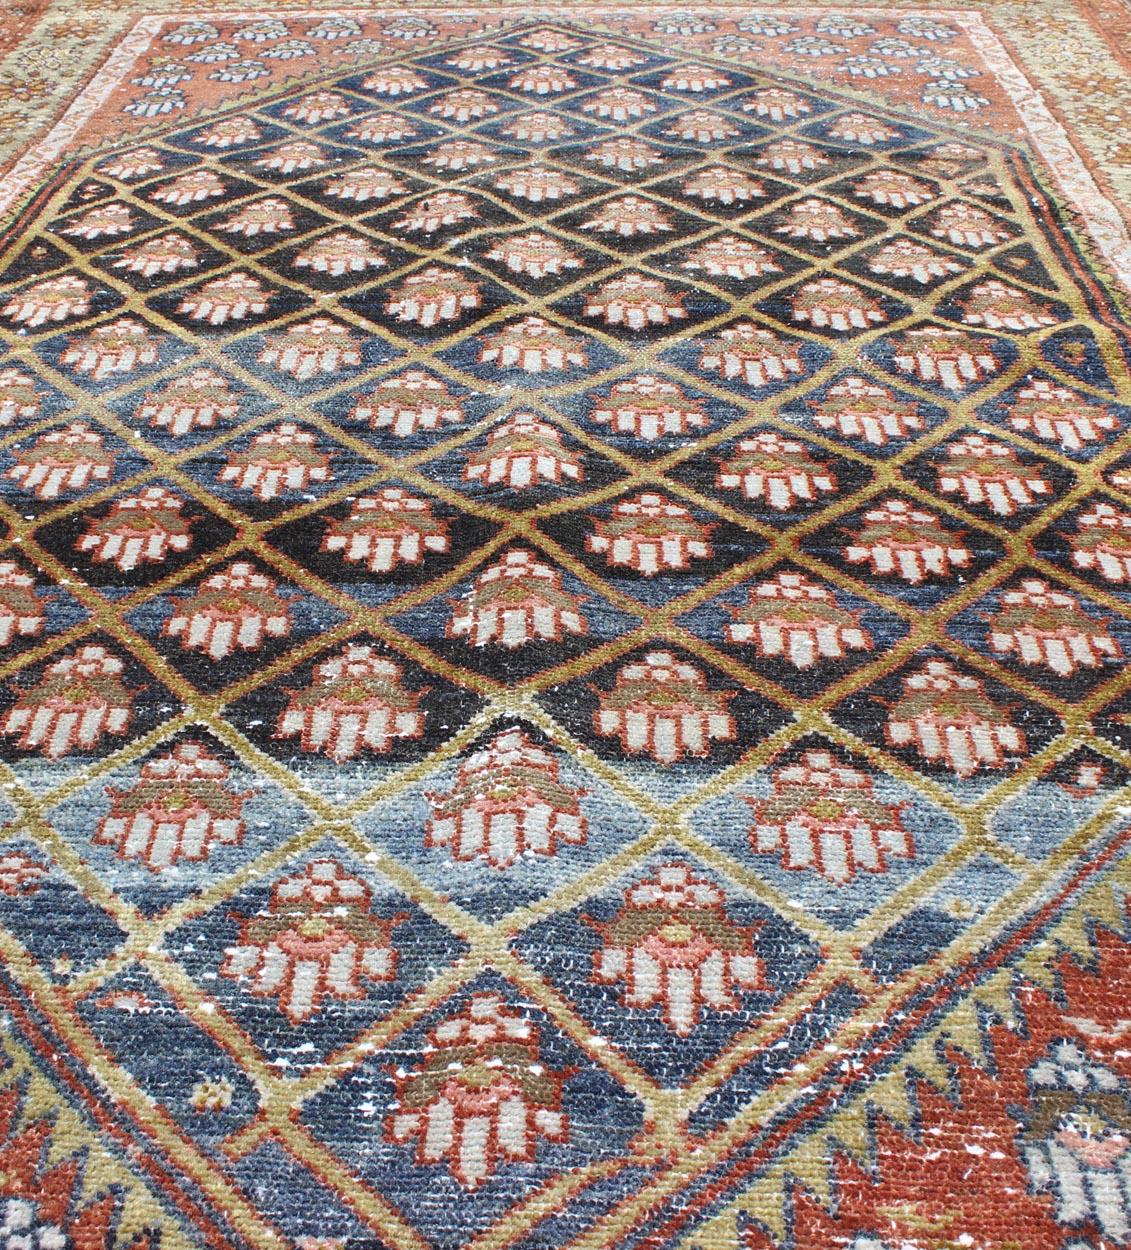 Wool Colorful Antique Persian Hamadan Rug with Large Scale Tribal Motif Design For Sale